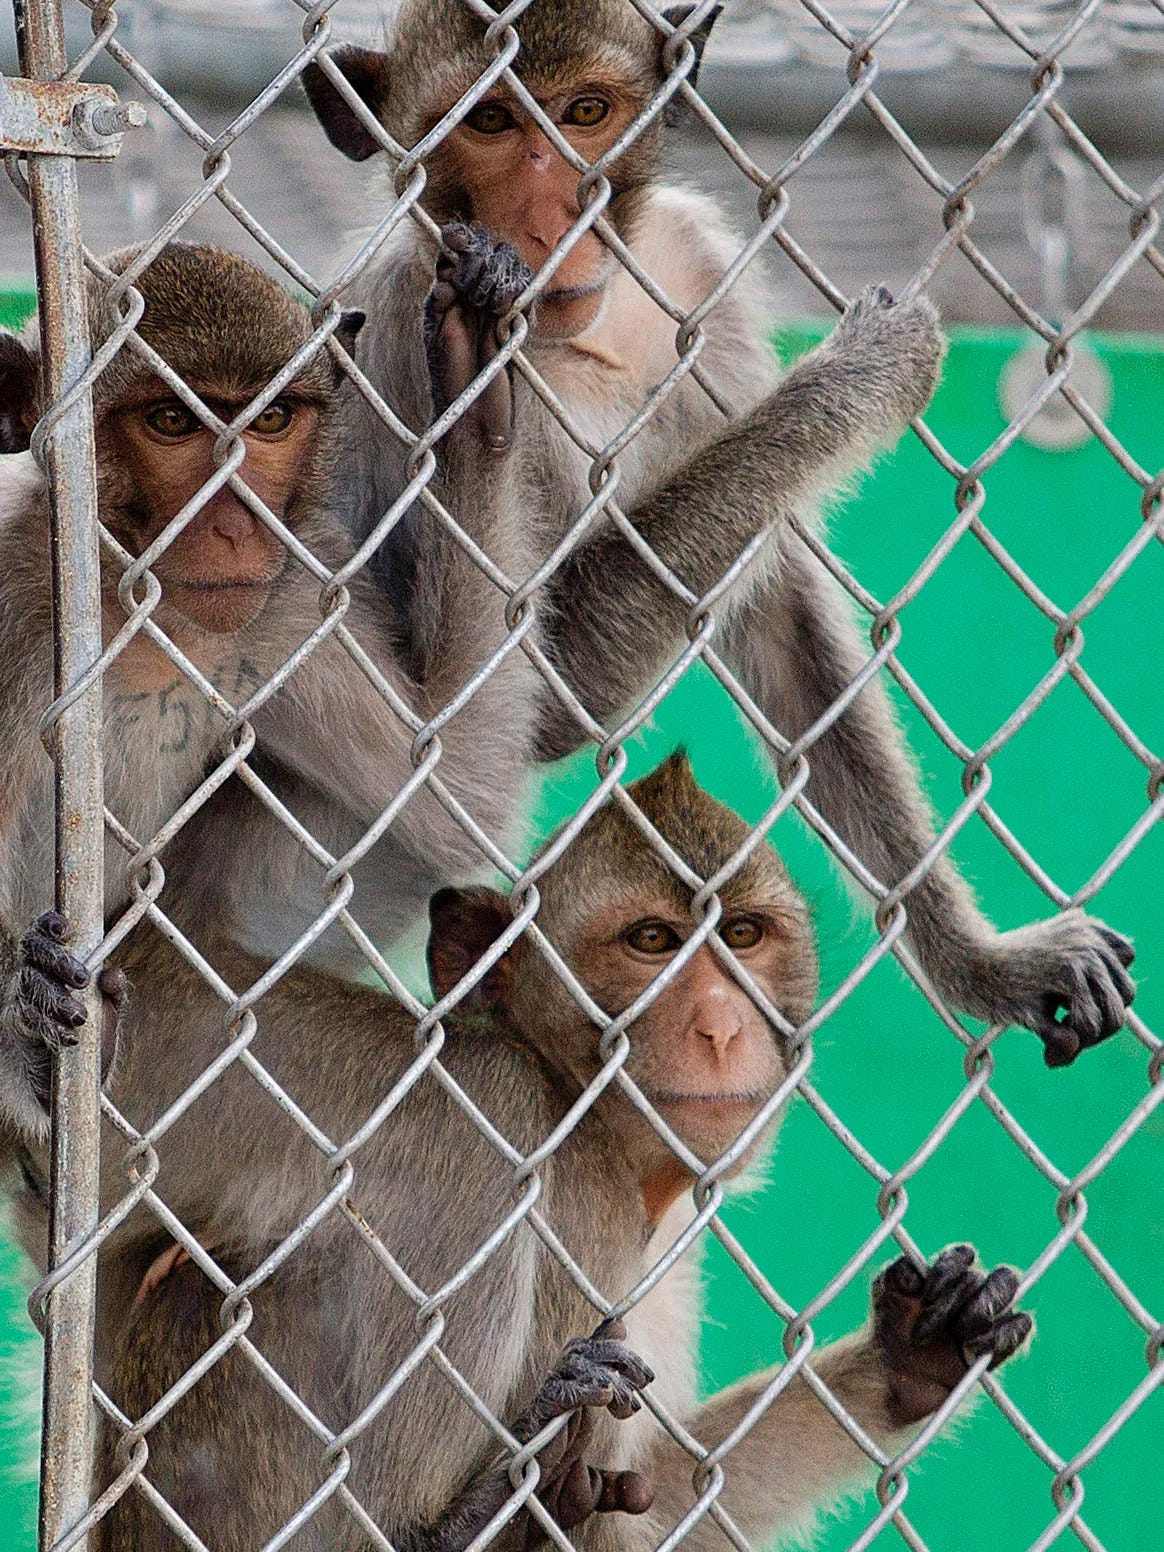 small town residents unite to fight a common enemy: a huge monkey farm